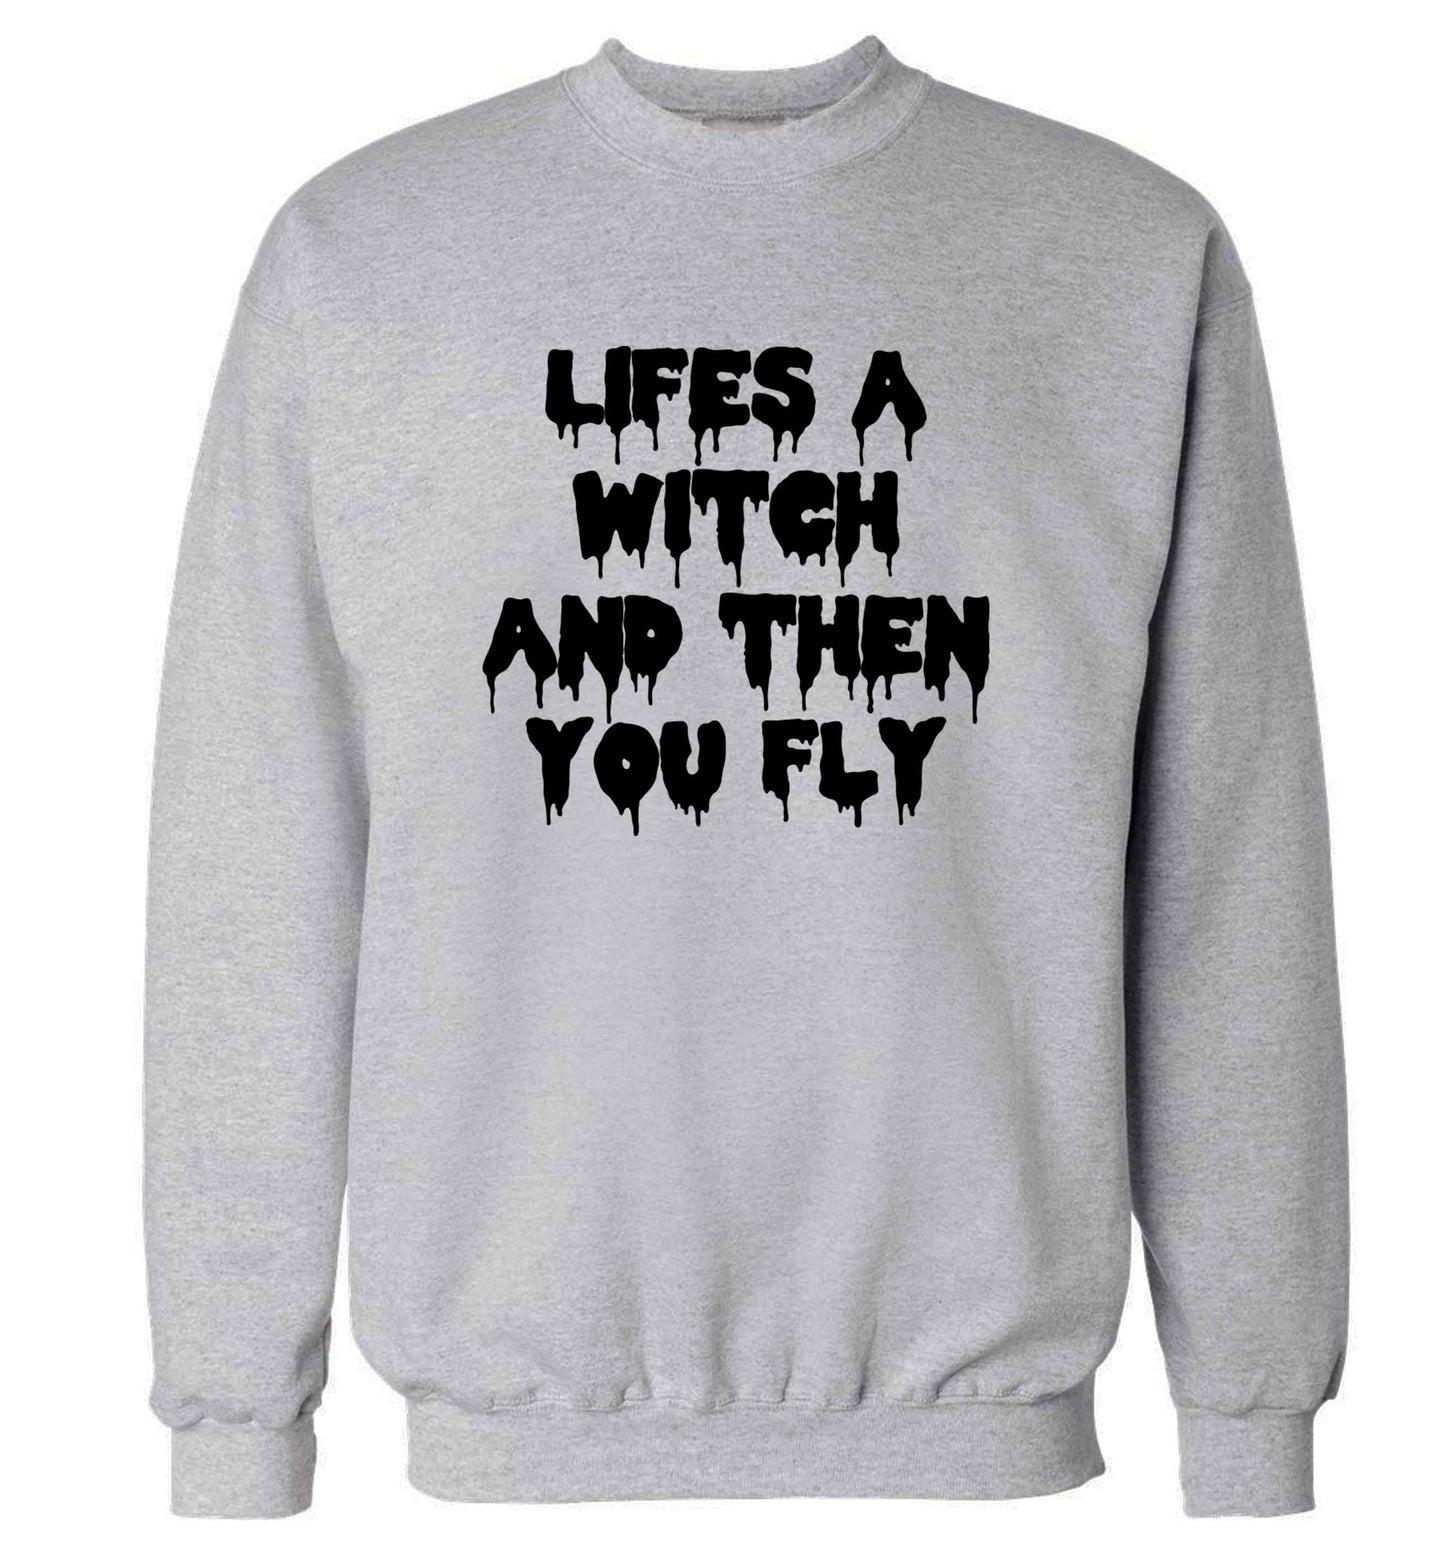 Life's a witch and then you fly adult's unisex grey sweater 2XL